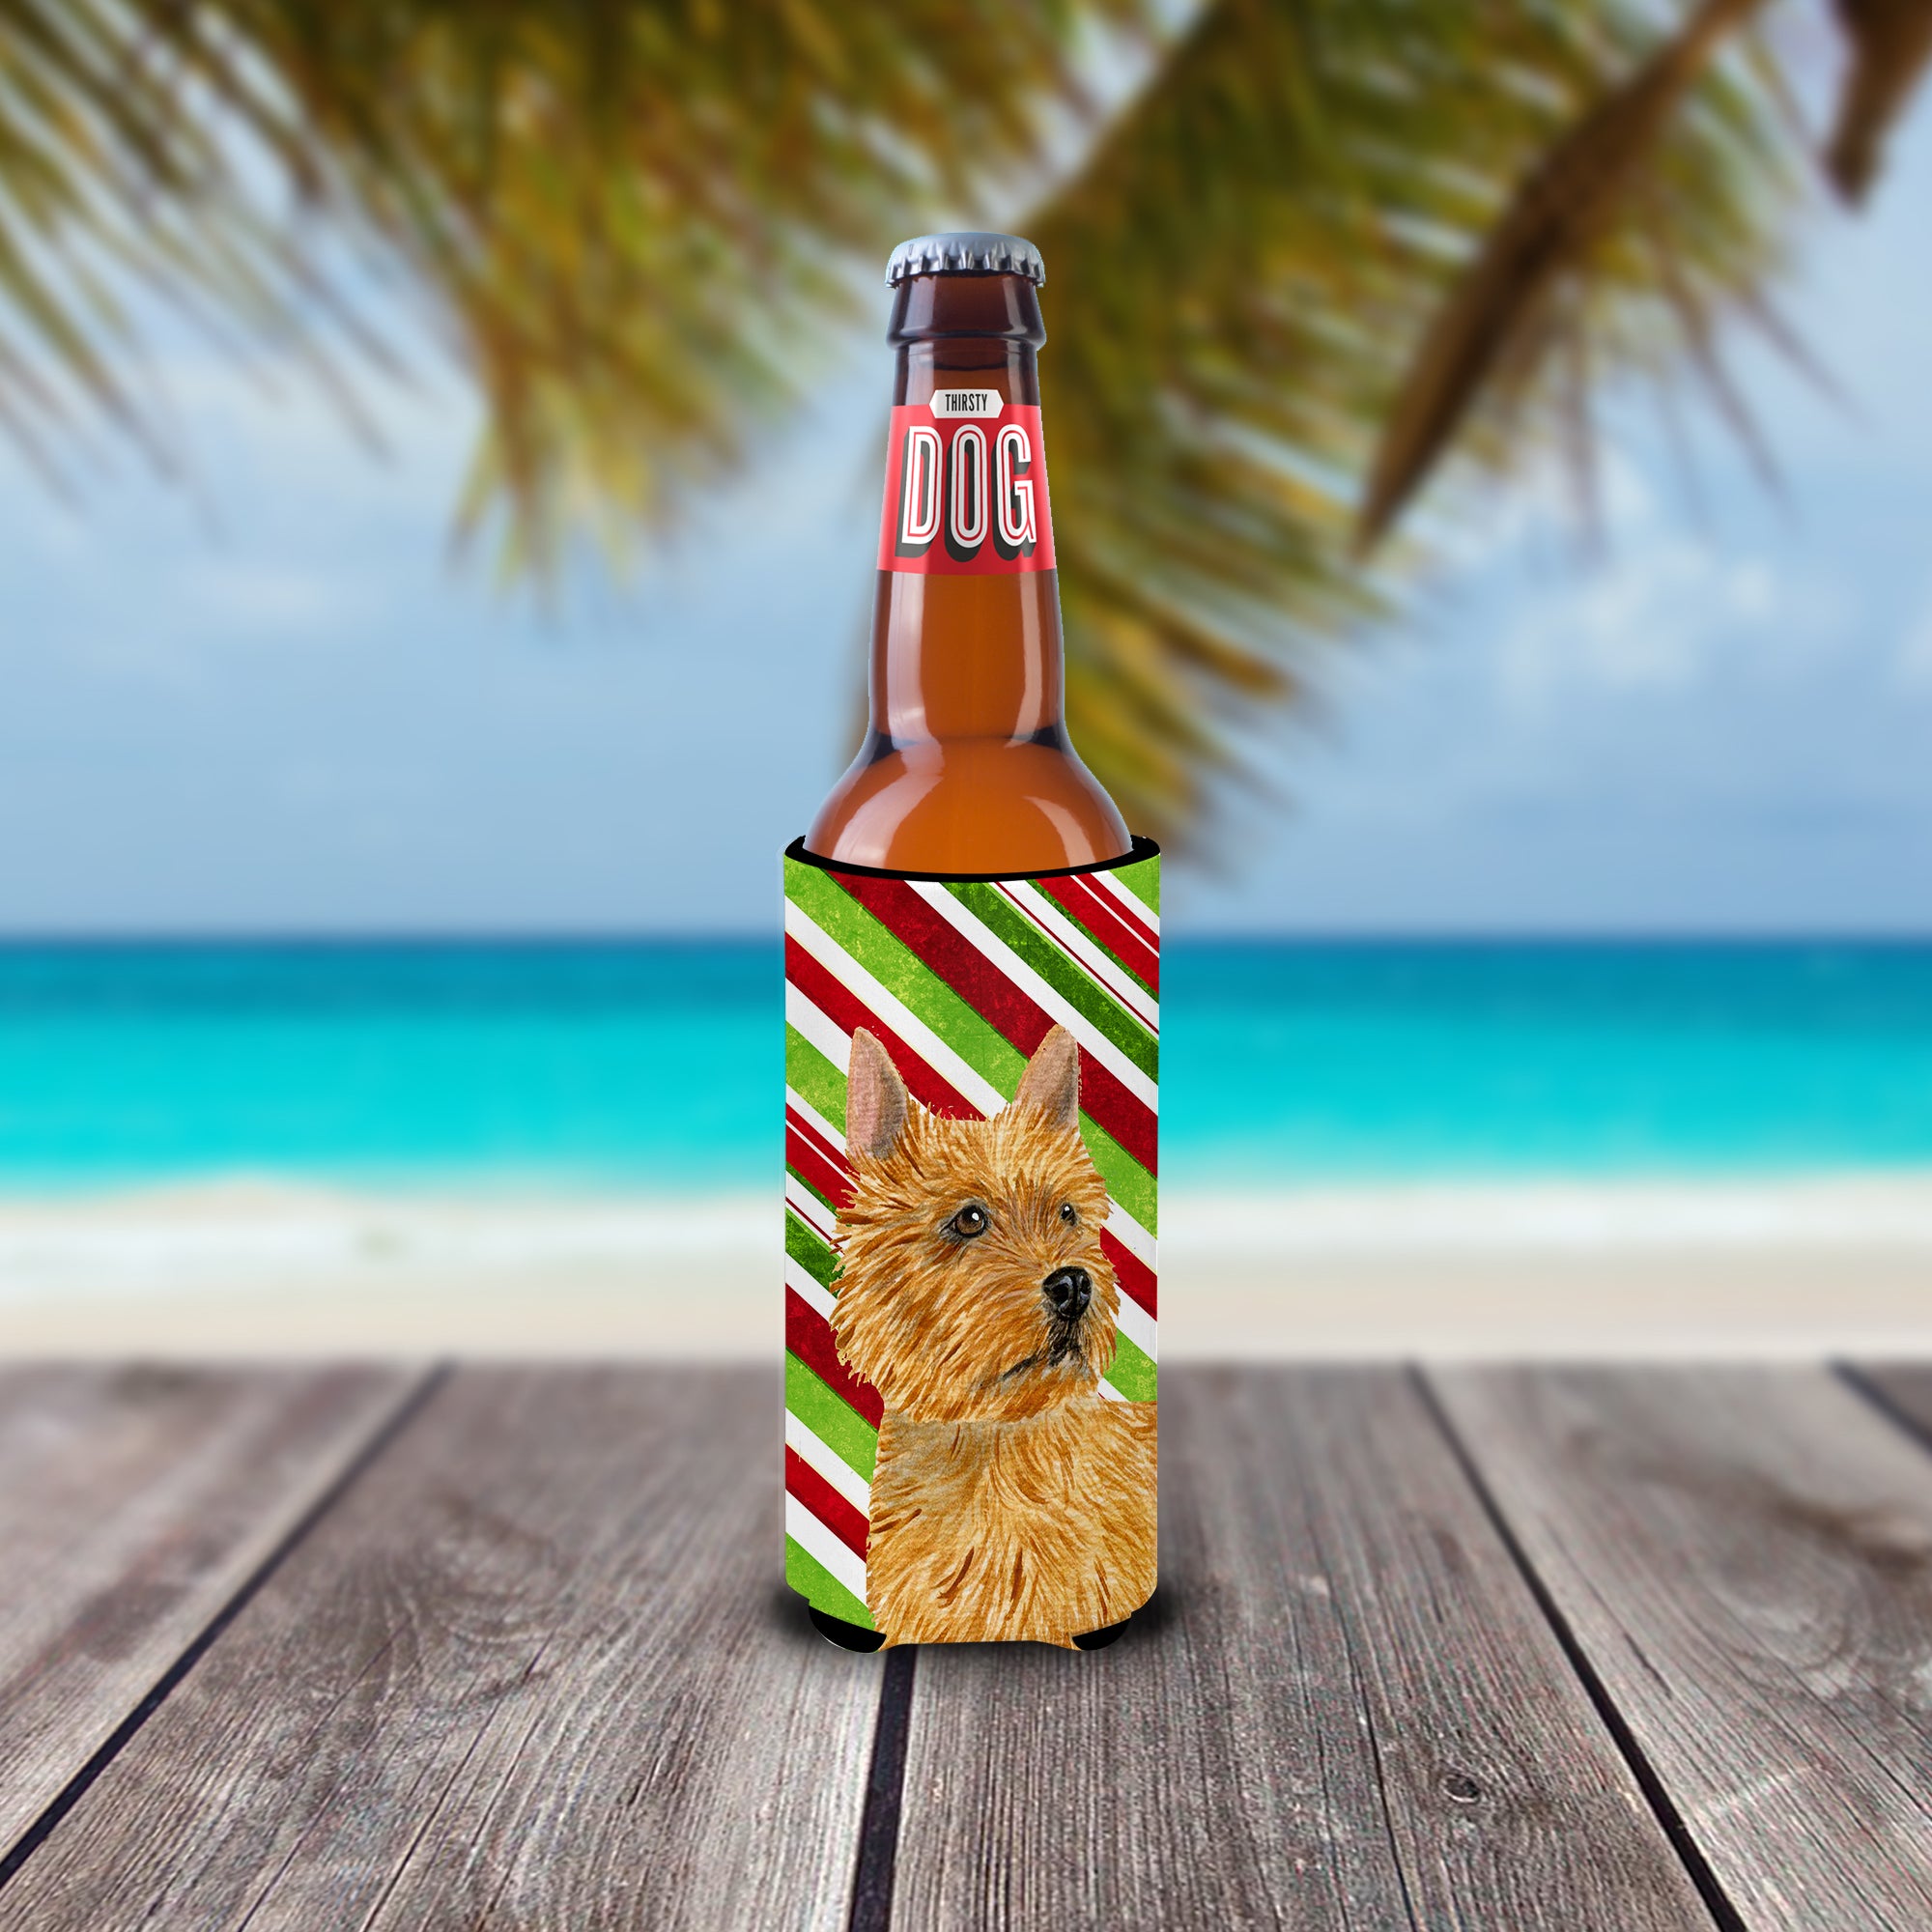 Norwich Terrier Candy Cane Holiday Christmas Ultra Beverage Insulators for slim cans SS4568MUK